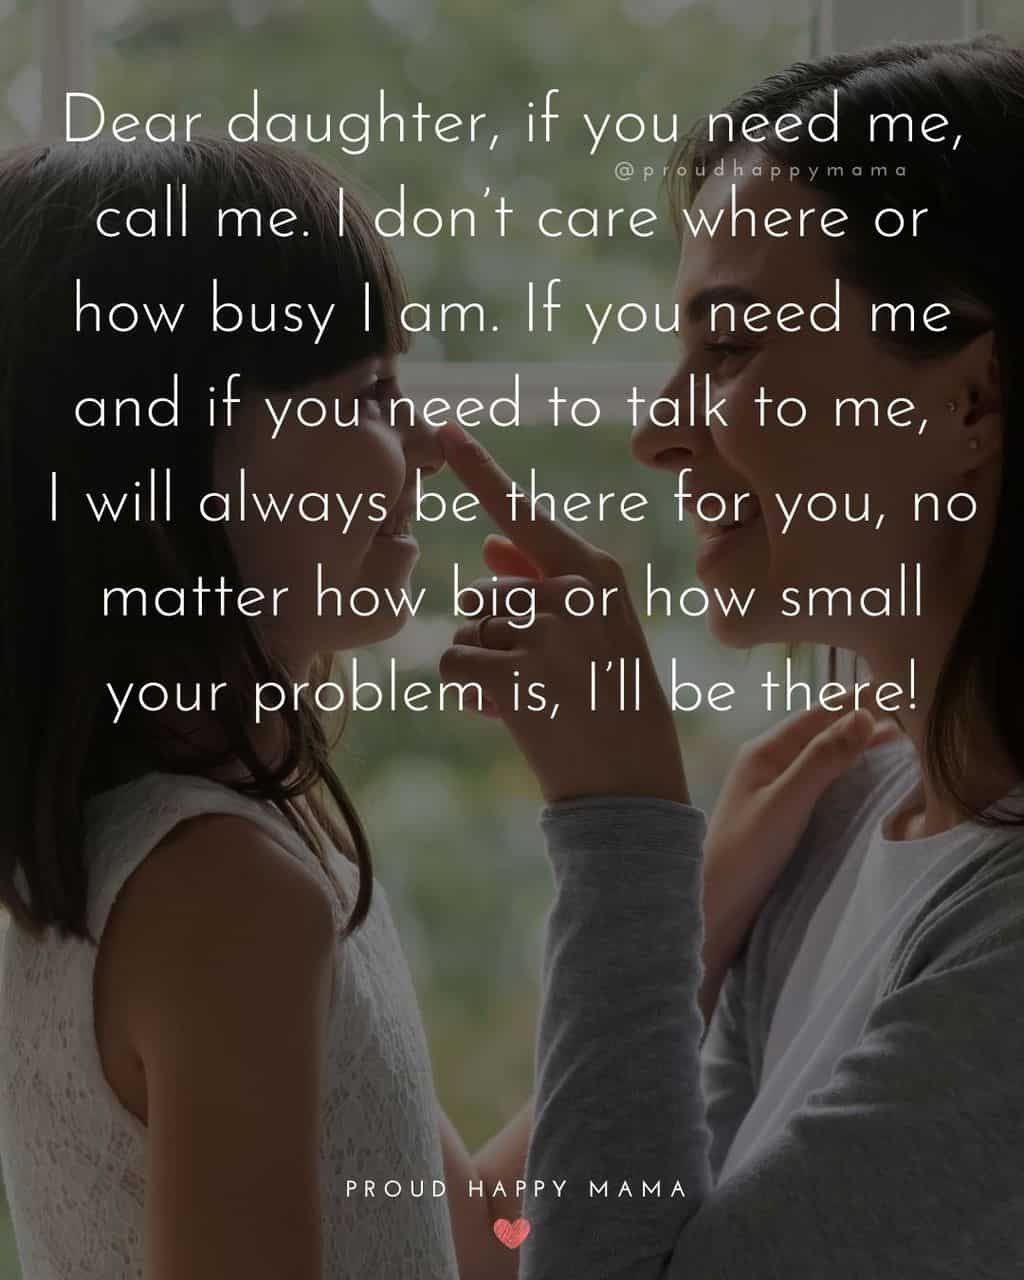 short quotes to my daughter - ‘Dear daughter, if you need me, call me. I don’t care where or how busy I am. If you need me and if you need to talk to me, I will always be there for you, no matter